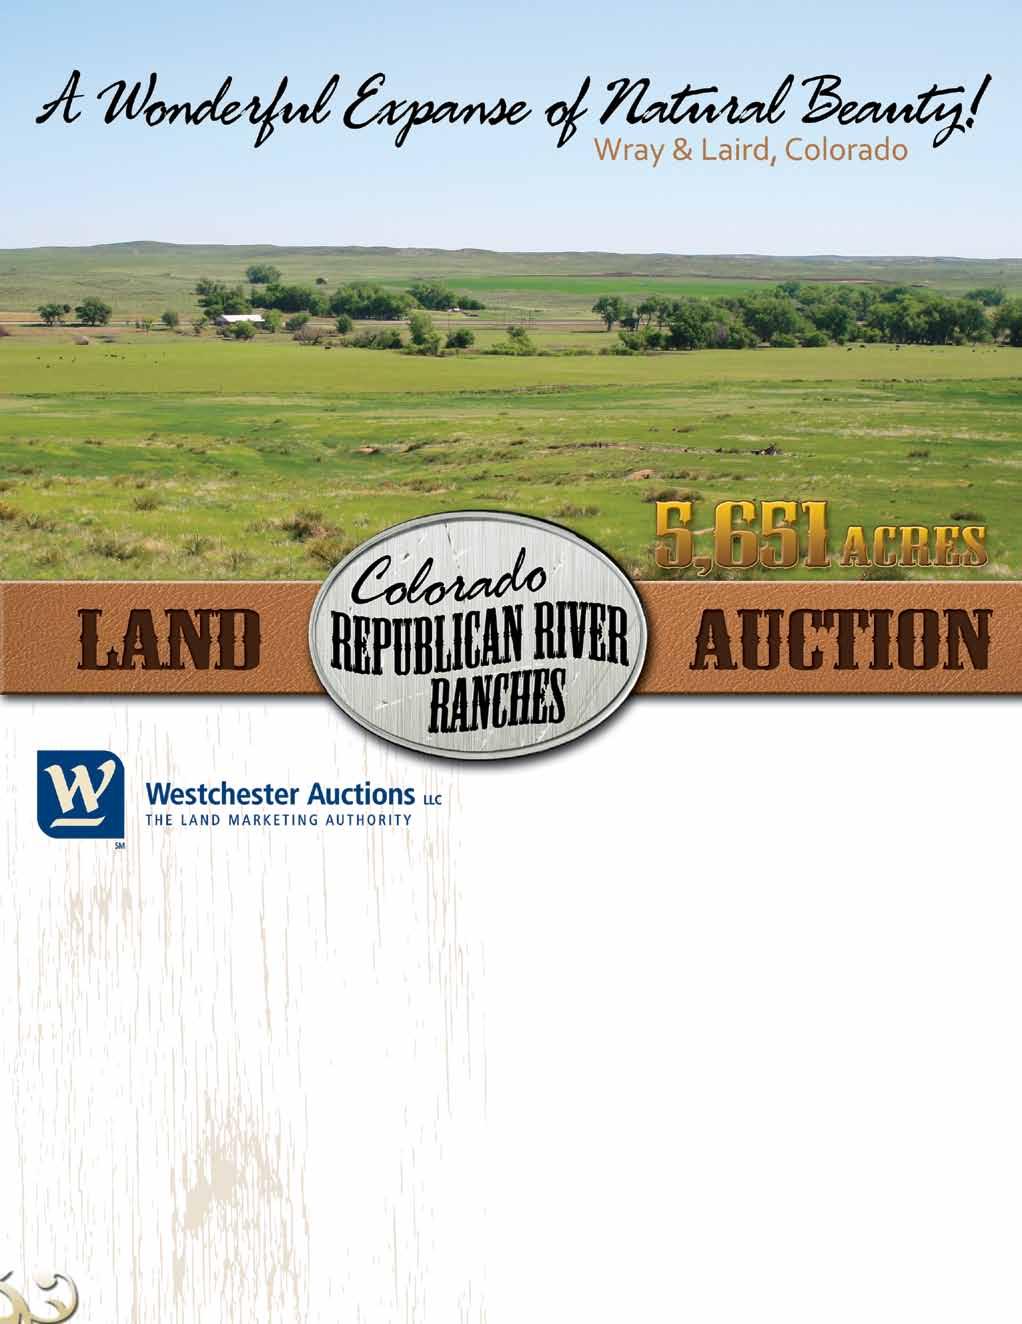 POWERED BY COLORADO OFFICE: P.O. Box 235 Eaton, CO 80615 970-454-2062 www.westchester-auctions.com HEADQUARTERS: P.O. Box 3009, Champaign, Il 61826 217-352-6000 800-607-6888 www.